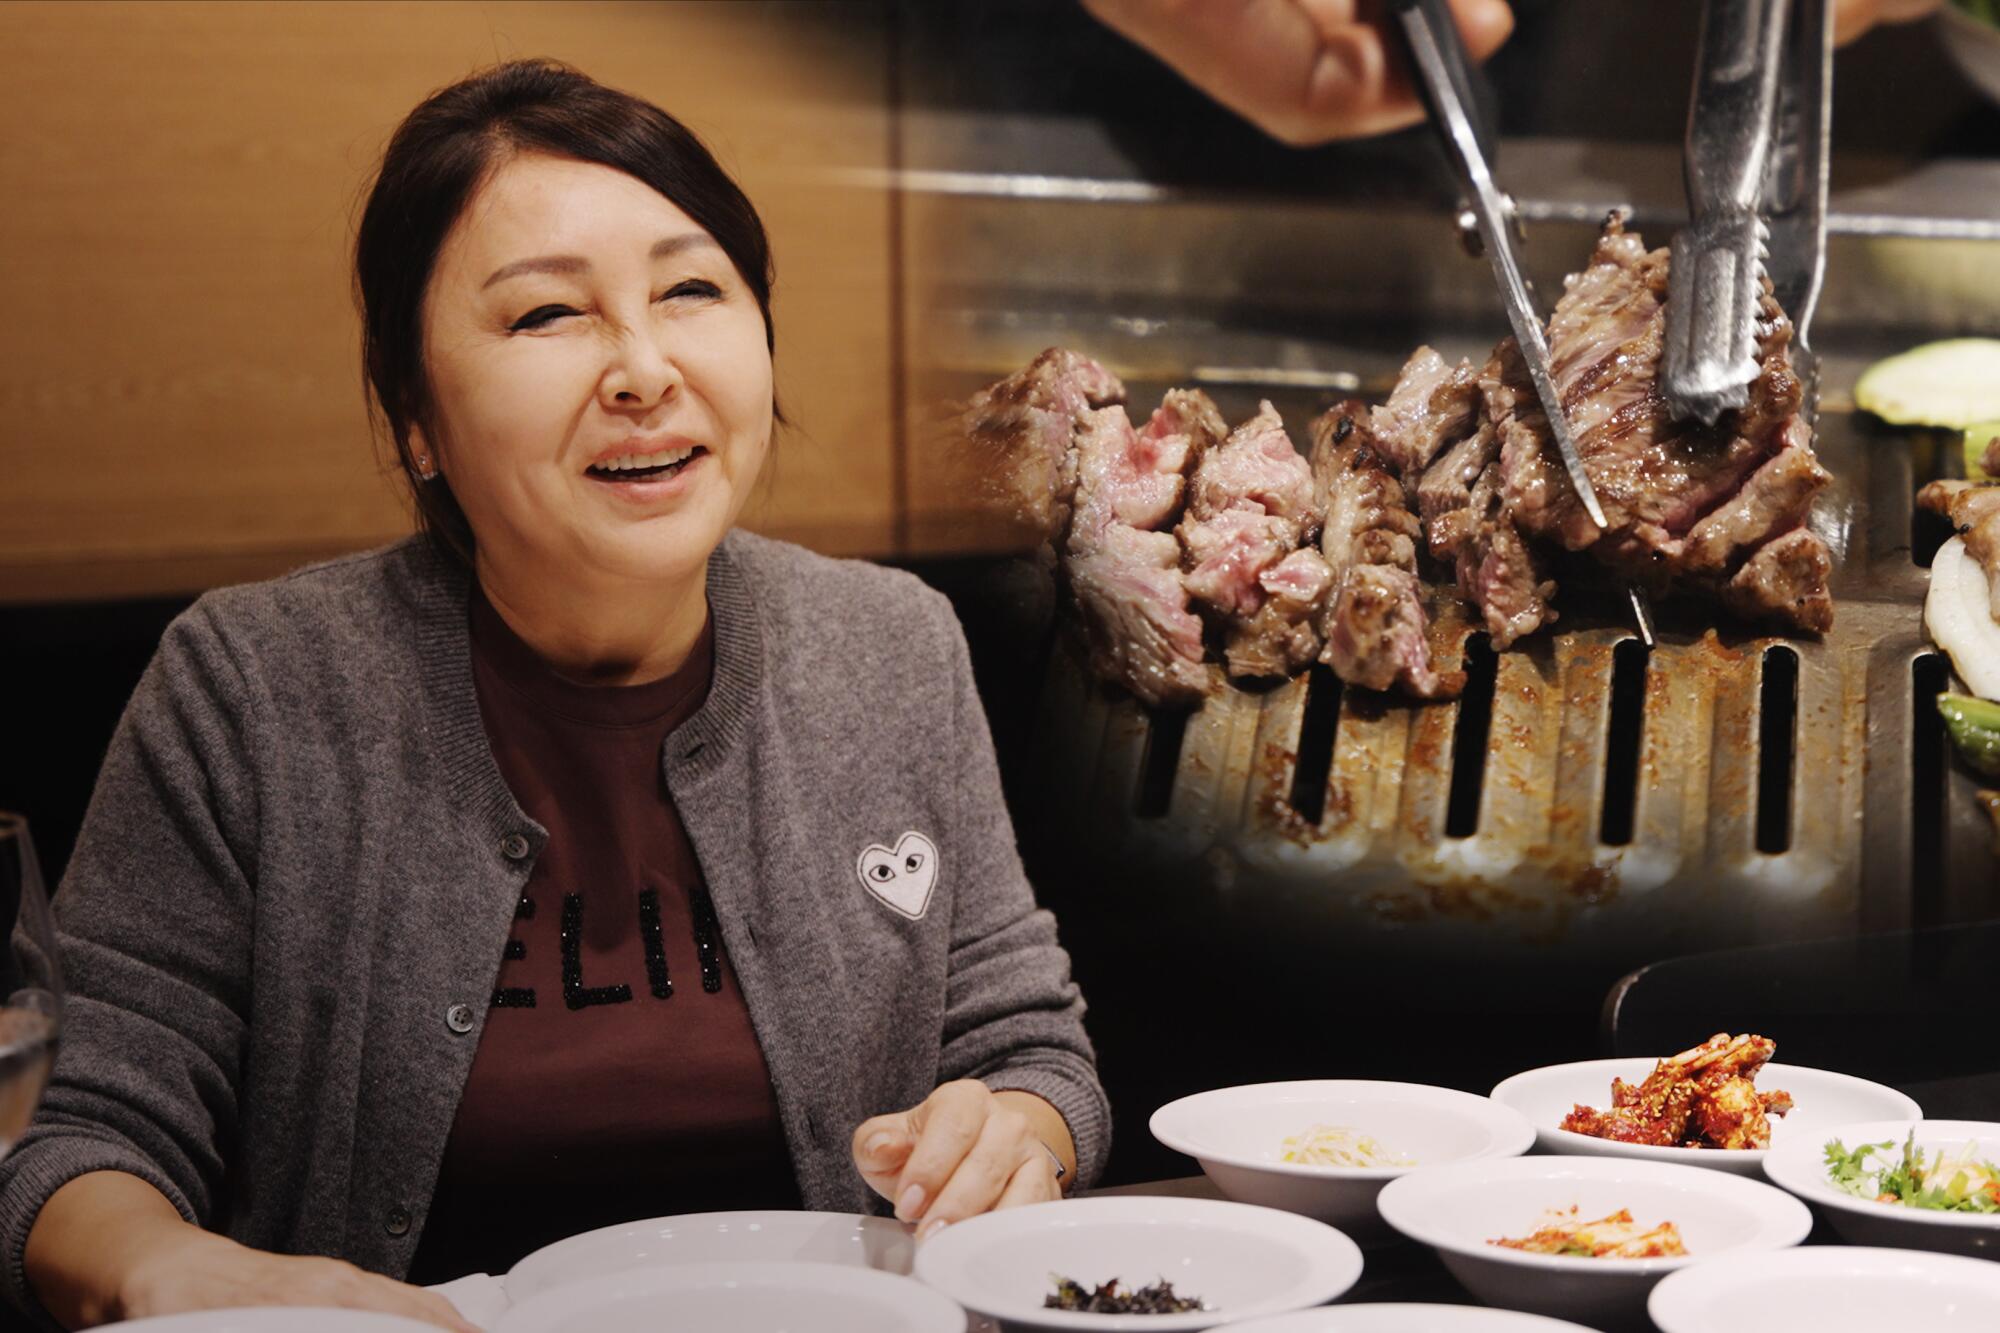 Jenee Kim of Park's BBQ sits at a table with several white plates of food before her